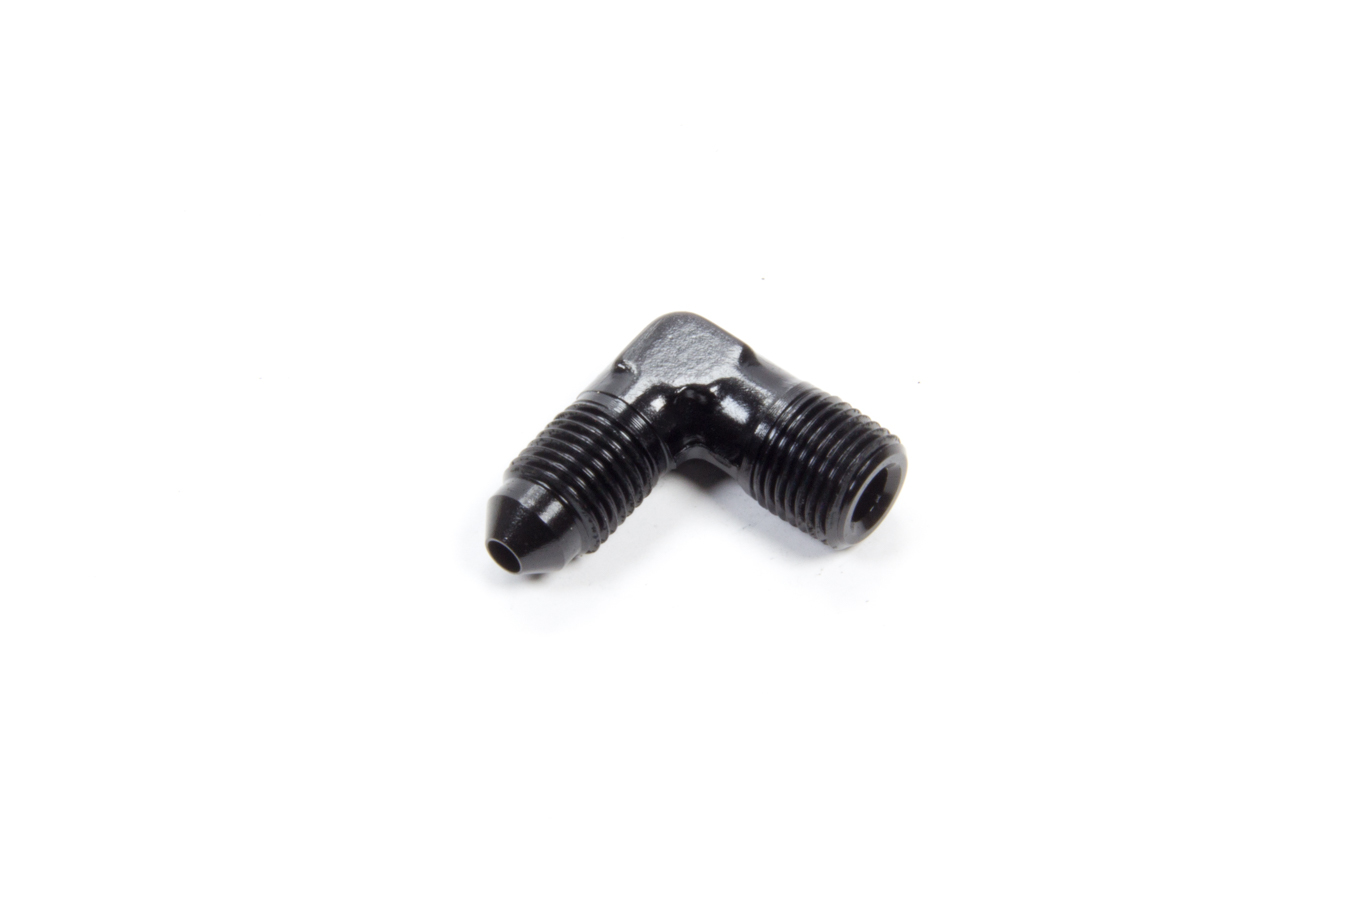 Aeroquip FCM5030 Fitting, Adapter, 90 Degree, 3 AN Male to 1/8 in NPT Male, Aluminum, Black Anodized, Each